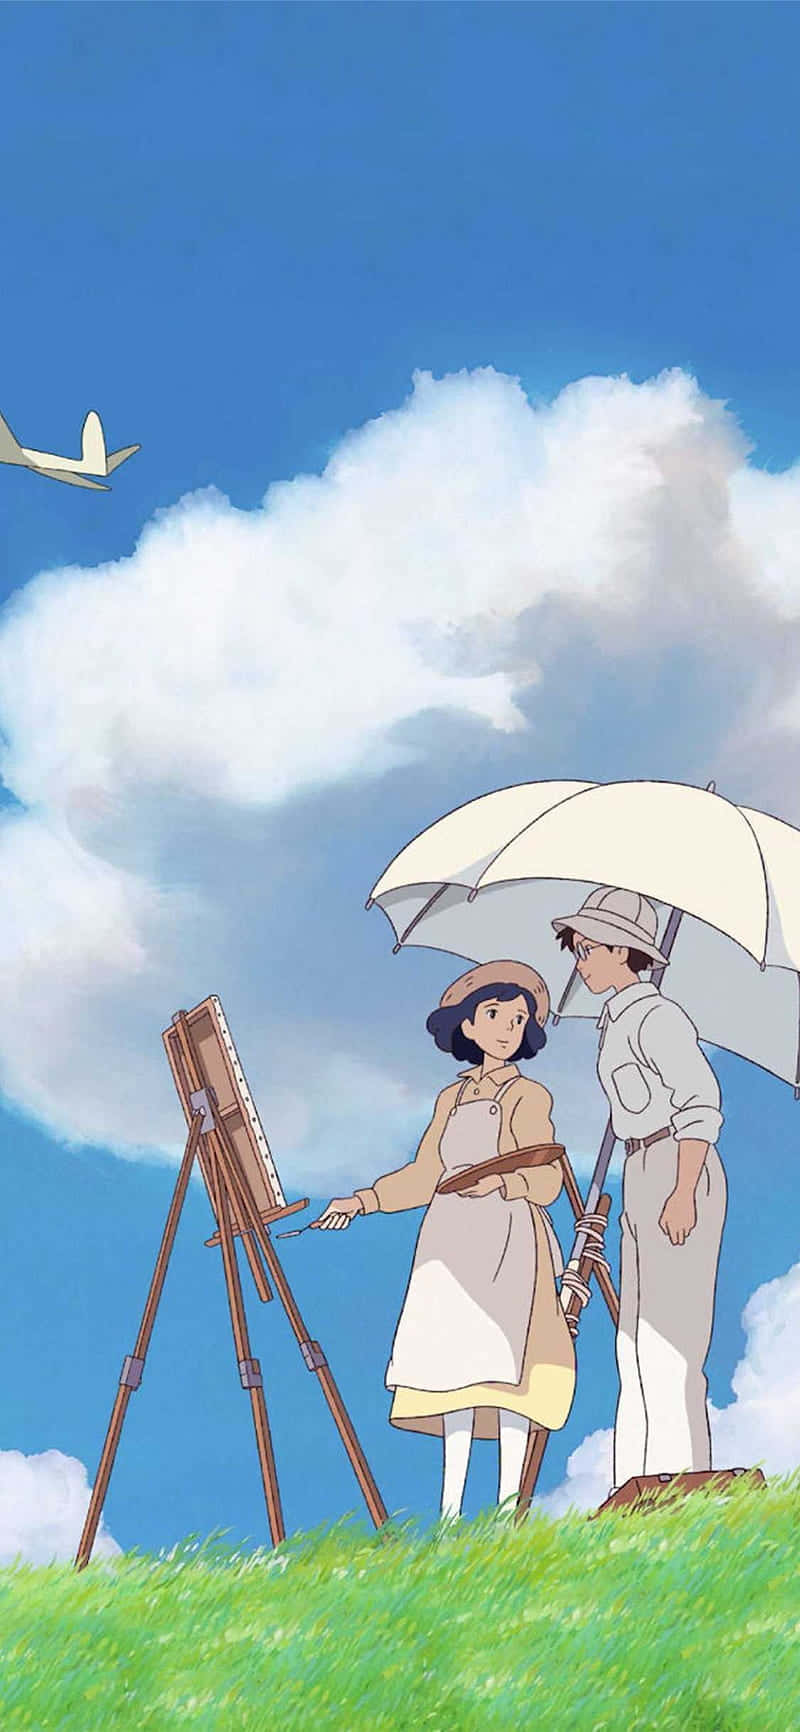 Ghibli Inspired Painting Session Wallpaper